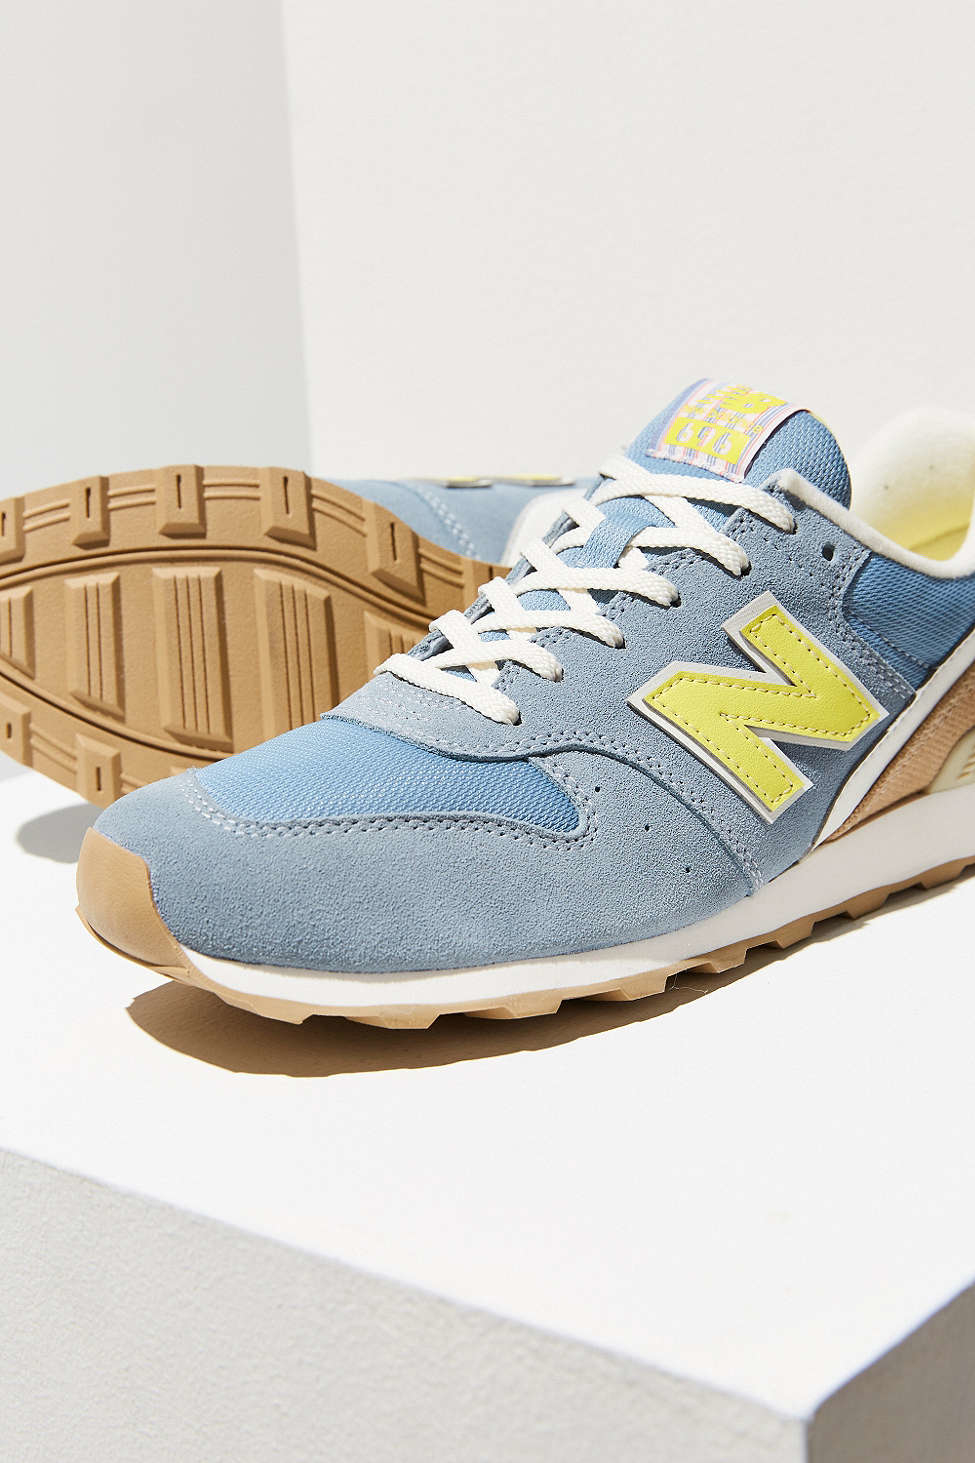 New Balance Suede 696 Lakeview Running Sneaker in Grey (Blue) - Lyst